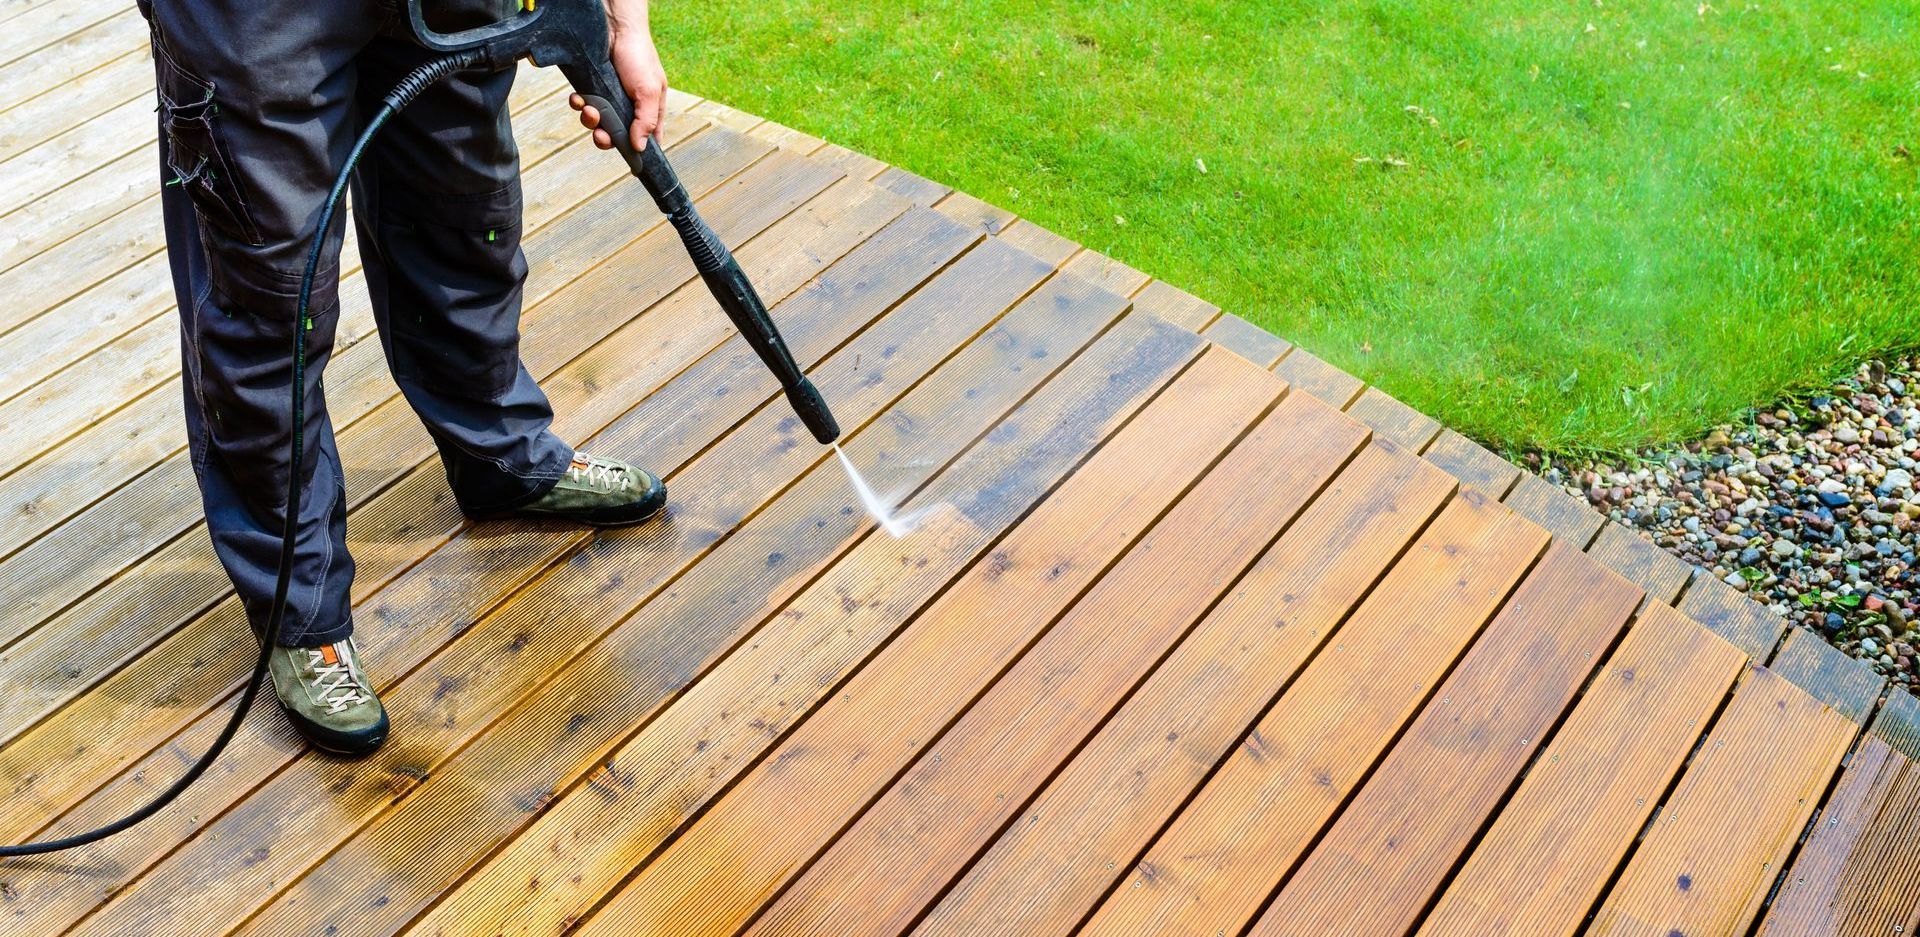 Best Residential Power Washing Company- Power Washer- Thurmont, MD